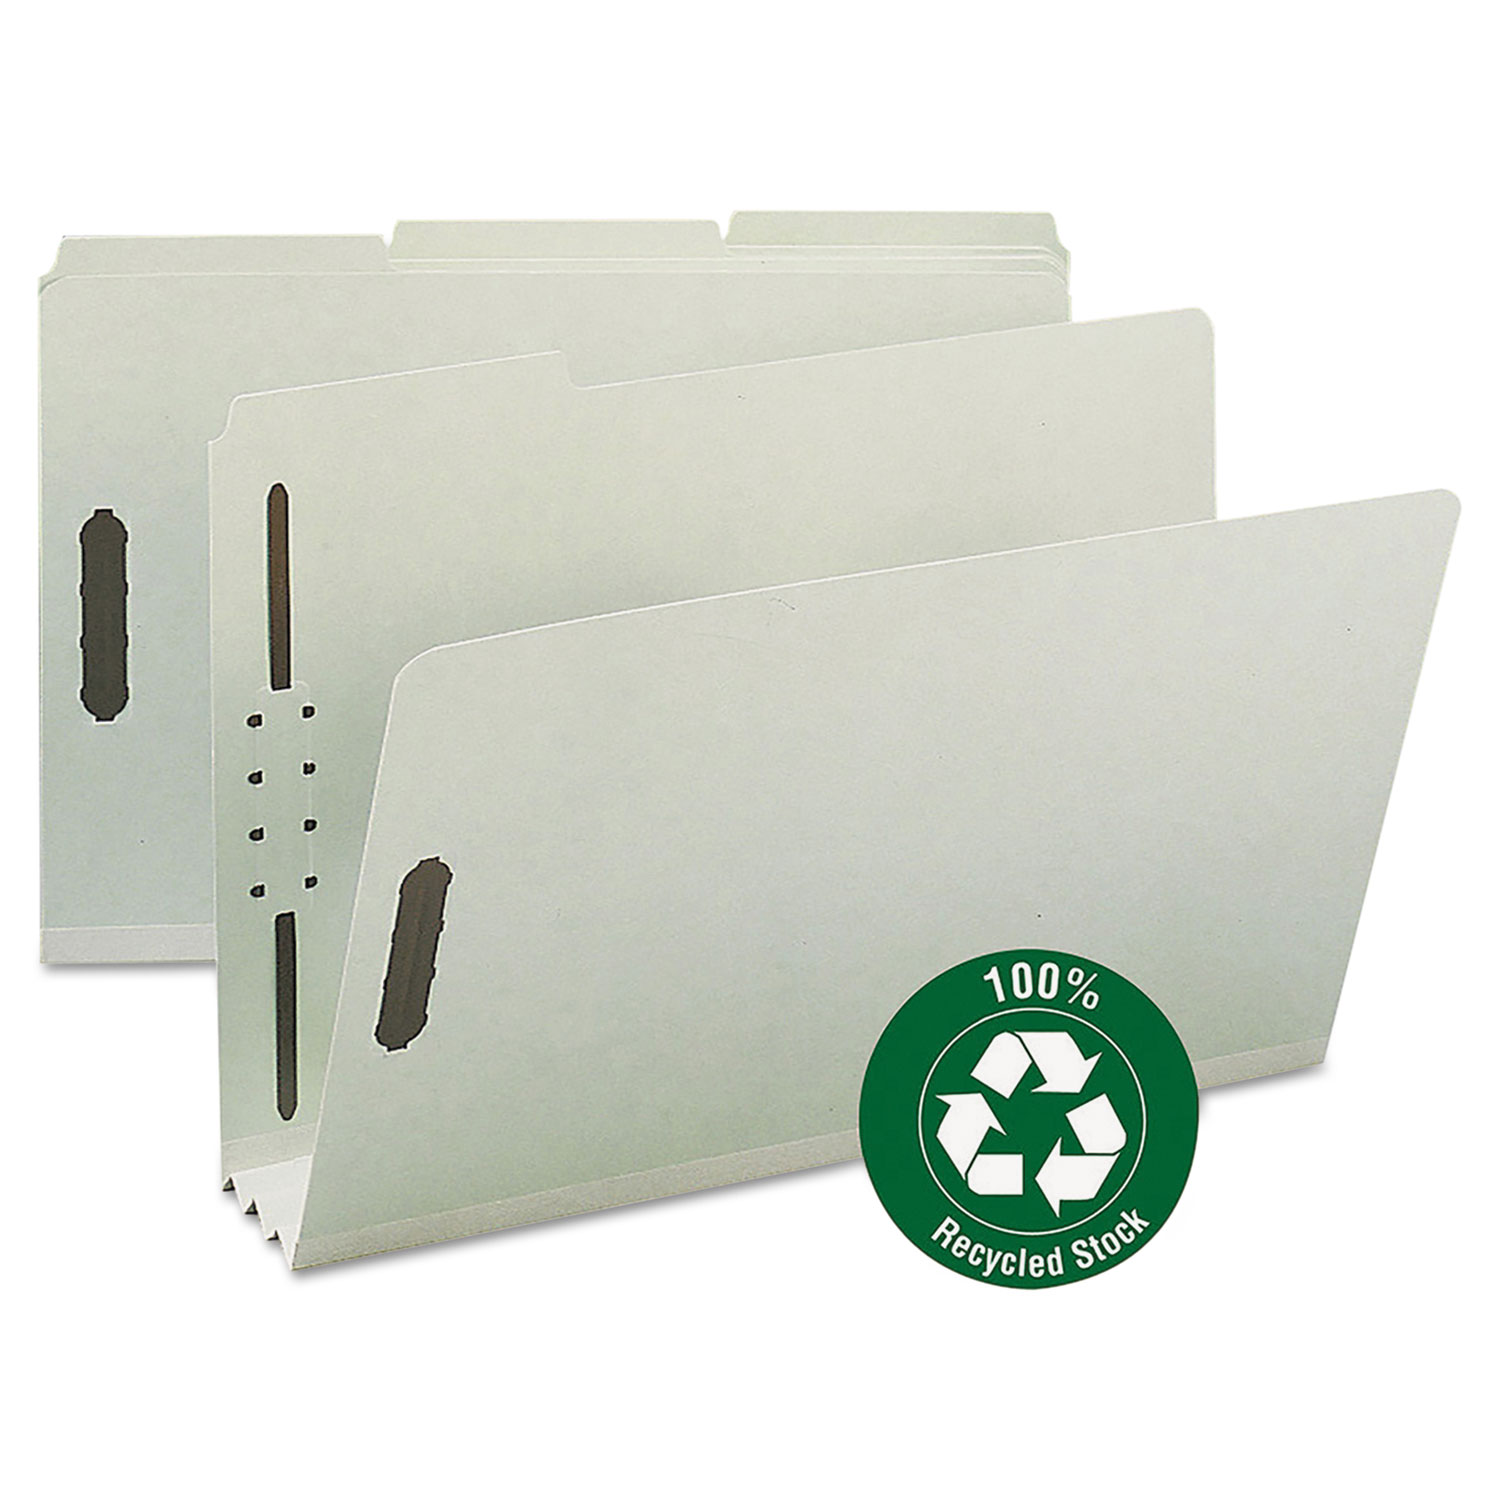  Smead 20005 100% Recycled Pressboard Fastener Folders, Legal Size, Gray-Green, 25/Box (SMD20005) 